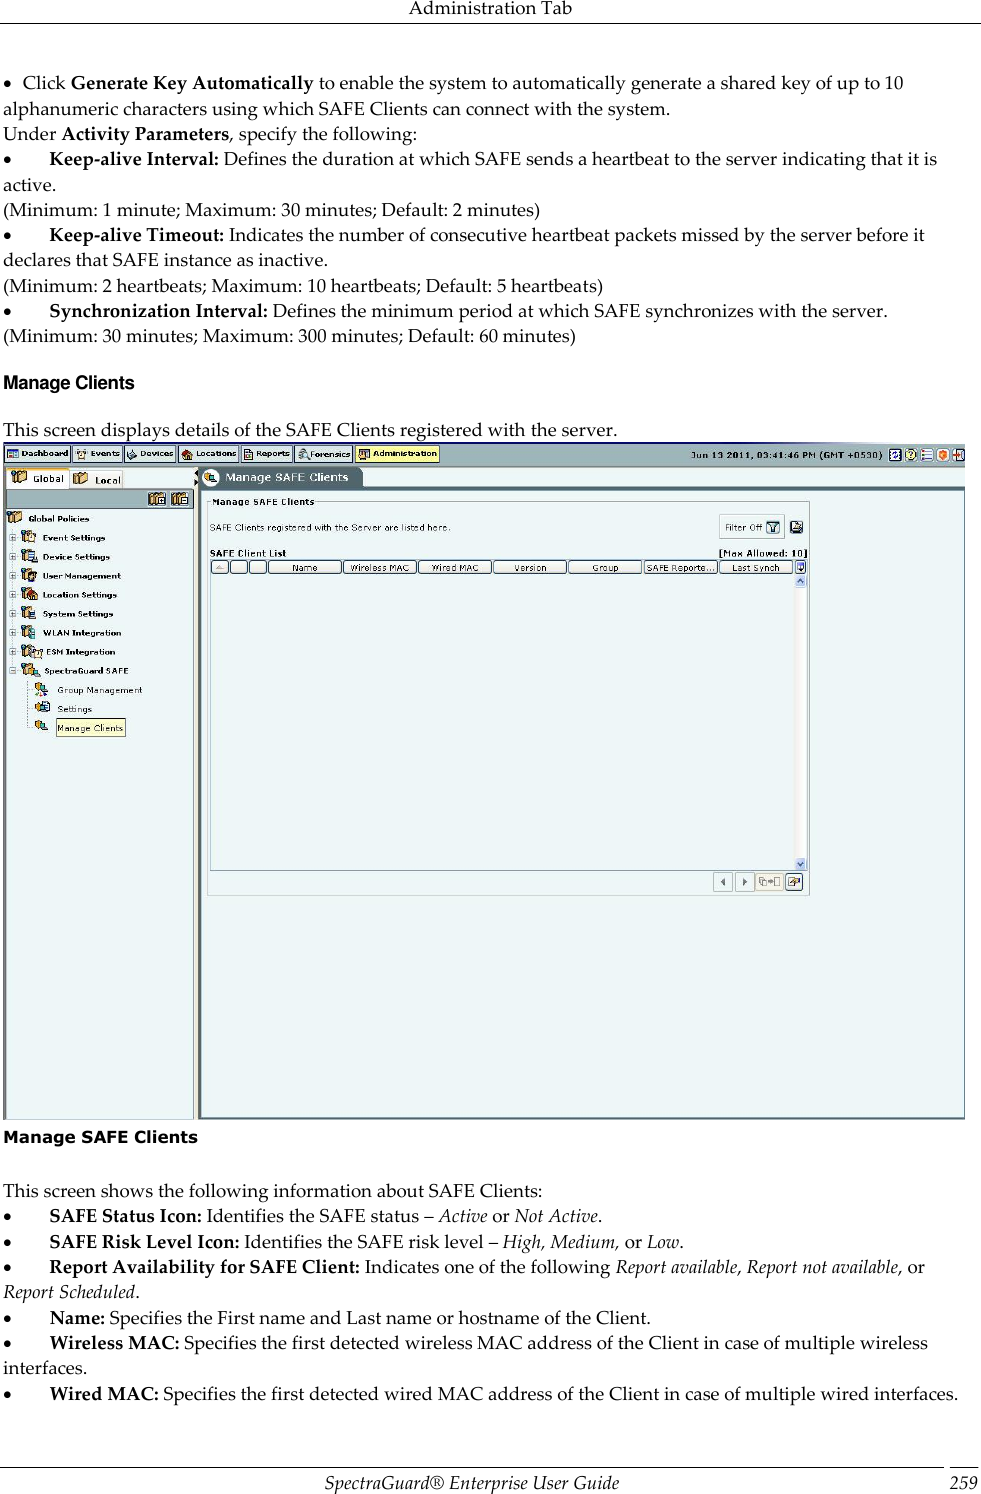 Administration Tab SpectraGuard®  Enterprise User Guide 259    Click Generate Key Automatically to enable the system to automatically generate a shared key of up to 10 alphanumeric characters using which SAFE Clients can connect with the system. Under Activity Parameters, specify the following:           Keep-alive Interval: Defines the duration at which SAFE sends a heartbeat to the server indicating that it is active. (Minimum: 1 minute; Maximum: 30 minutes; Default: 2 minutes)           Keep-alive Timeout: Indicates the number of consecutive heartbeat packets missed by the server before it declares that SAFE instance as inactive. (Minimum: 2 heartbeats; Maximum: 10 heartbeats; Default: 5 heartbeats)           Synchronization Interval: Defines the minimum period at which SAFE synchronizes with the server. (Minimum: 30 minutes; Maximum: 300 minutes; Default: 60 minutes) Manage Clients This screen displays details of the SAFE Clients registered with the server.  Manage SAFE Clients   This screen shows the following information about SAFE Clients:           SAFE Status Icon: Identifies the SAFE status – Active or Not Active.           SAFE Risk Level Icon: Identifies the SAFE risk level – High, Medium, or Low.           Report Availability for SAFE Client: Indicates one of the following Report available, Report not available, or Report Scheduled.           Name: Specifies the First name and Last name or hostname of the Client.           Wireless MAC: Specifies the first detected wireless MAC address of the Client in case of multiple wireless interfaces.           Wired MAC: Specifies the first detected wired MAC address of the Client in case of multiple wired interfaces. 